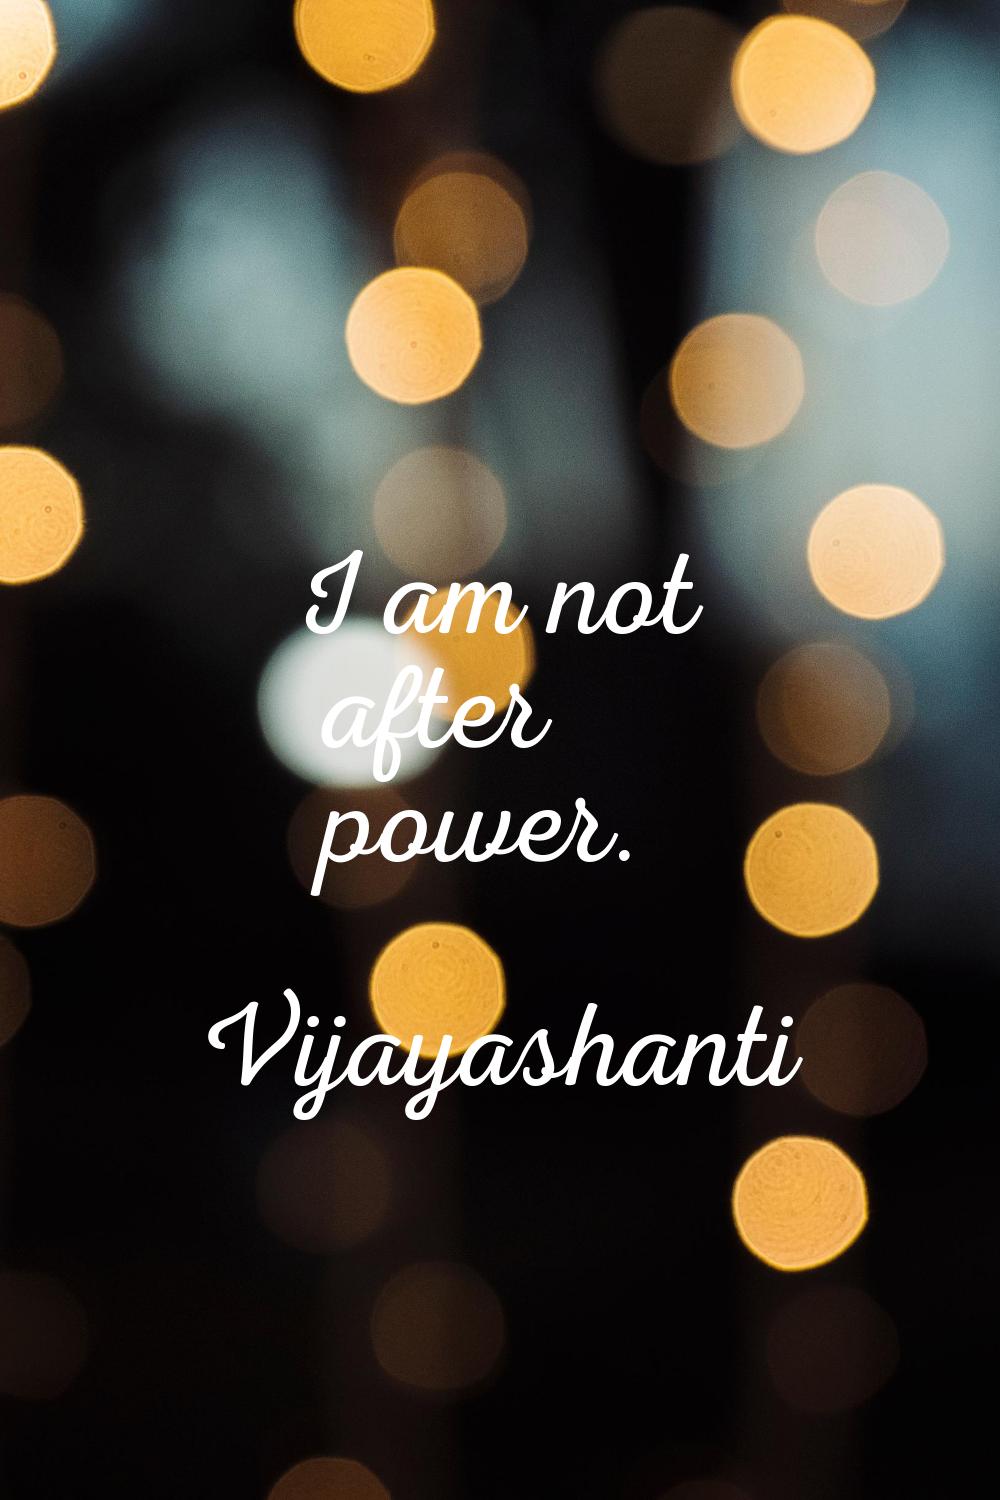 I am not after power.